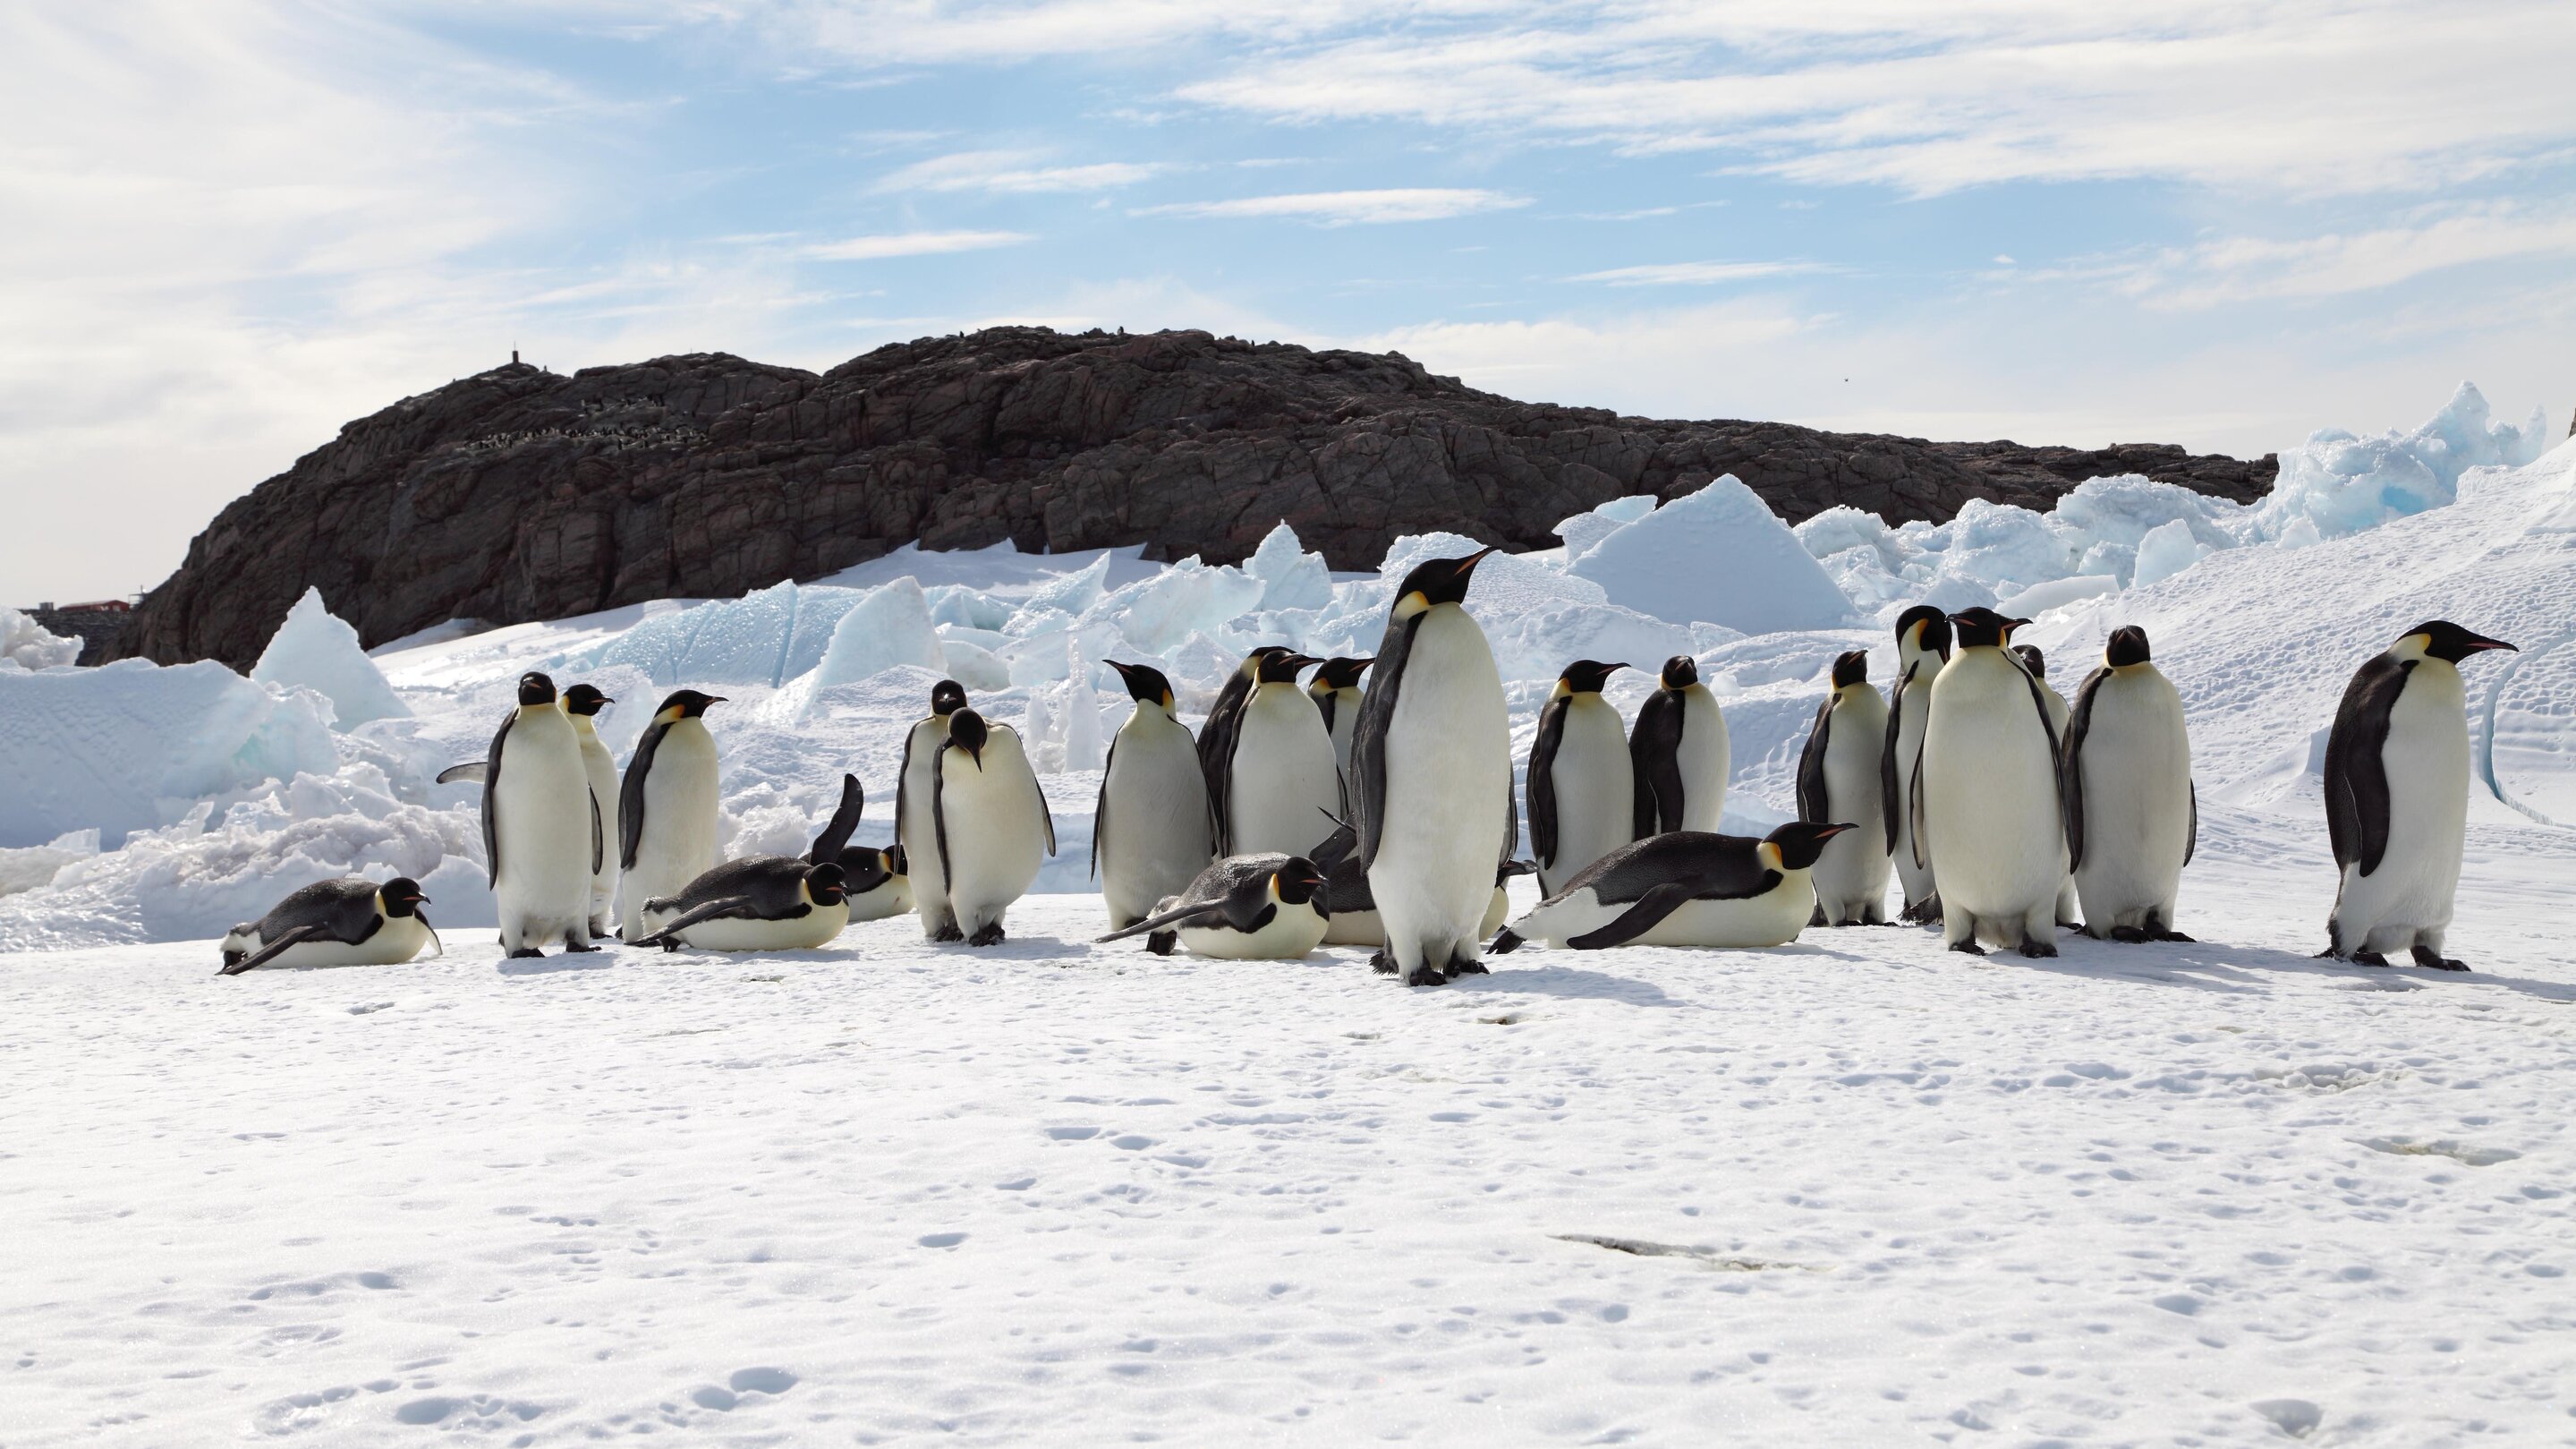 Unless warming is slowed, emperor penguins will be marching towards  extinction